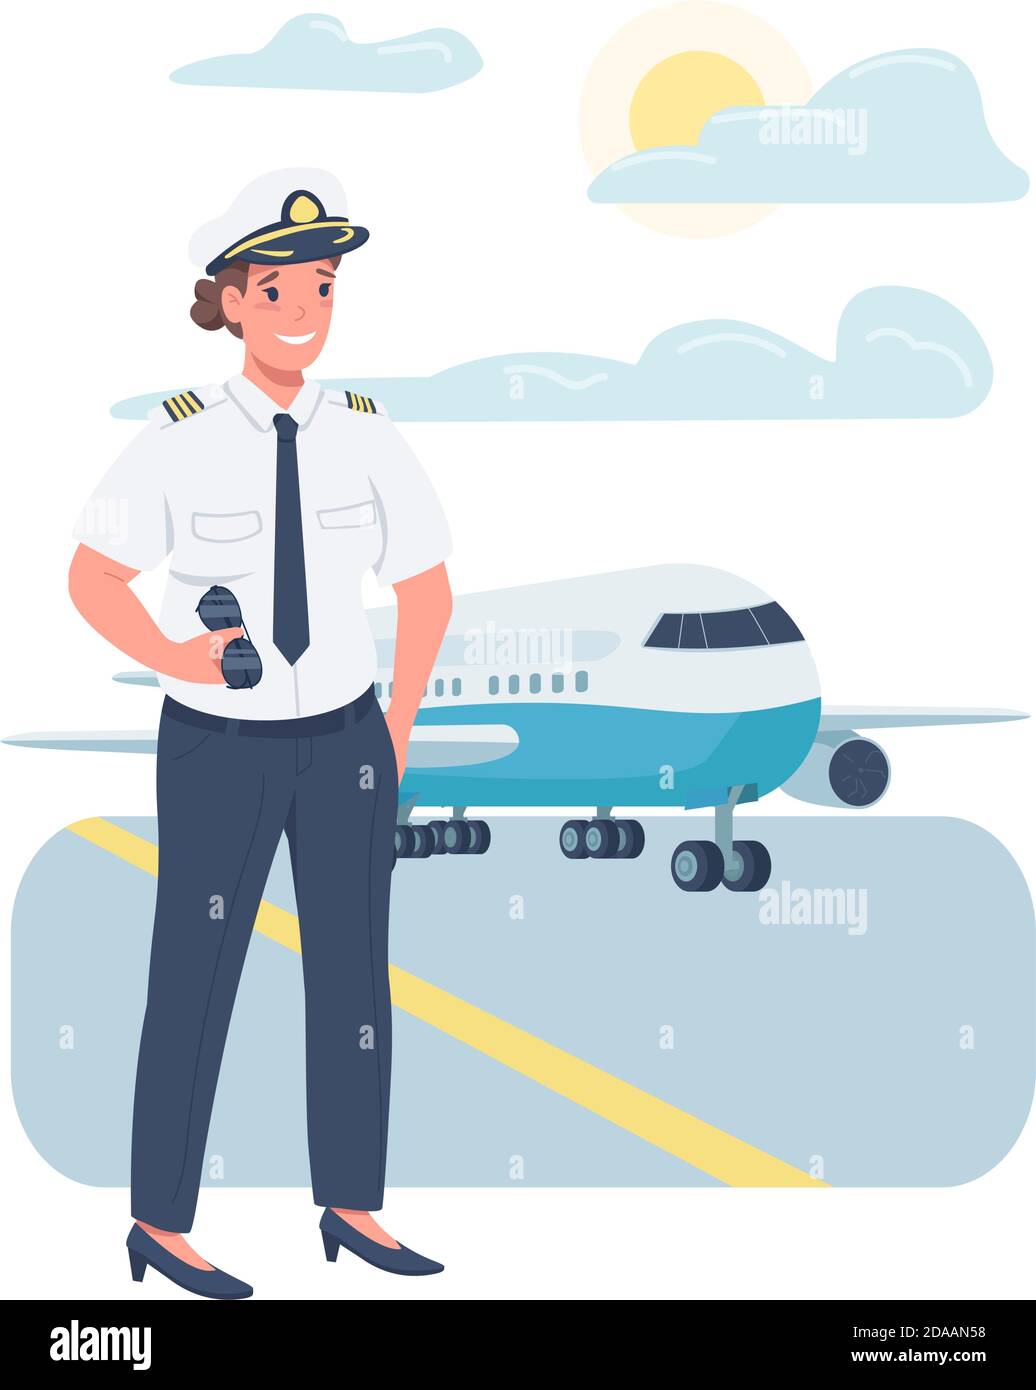 Airline pilot wearing shirt and tie with epaulets and hat conceptual image  about the aviation industry and the safety of  CanStock